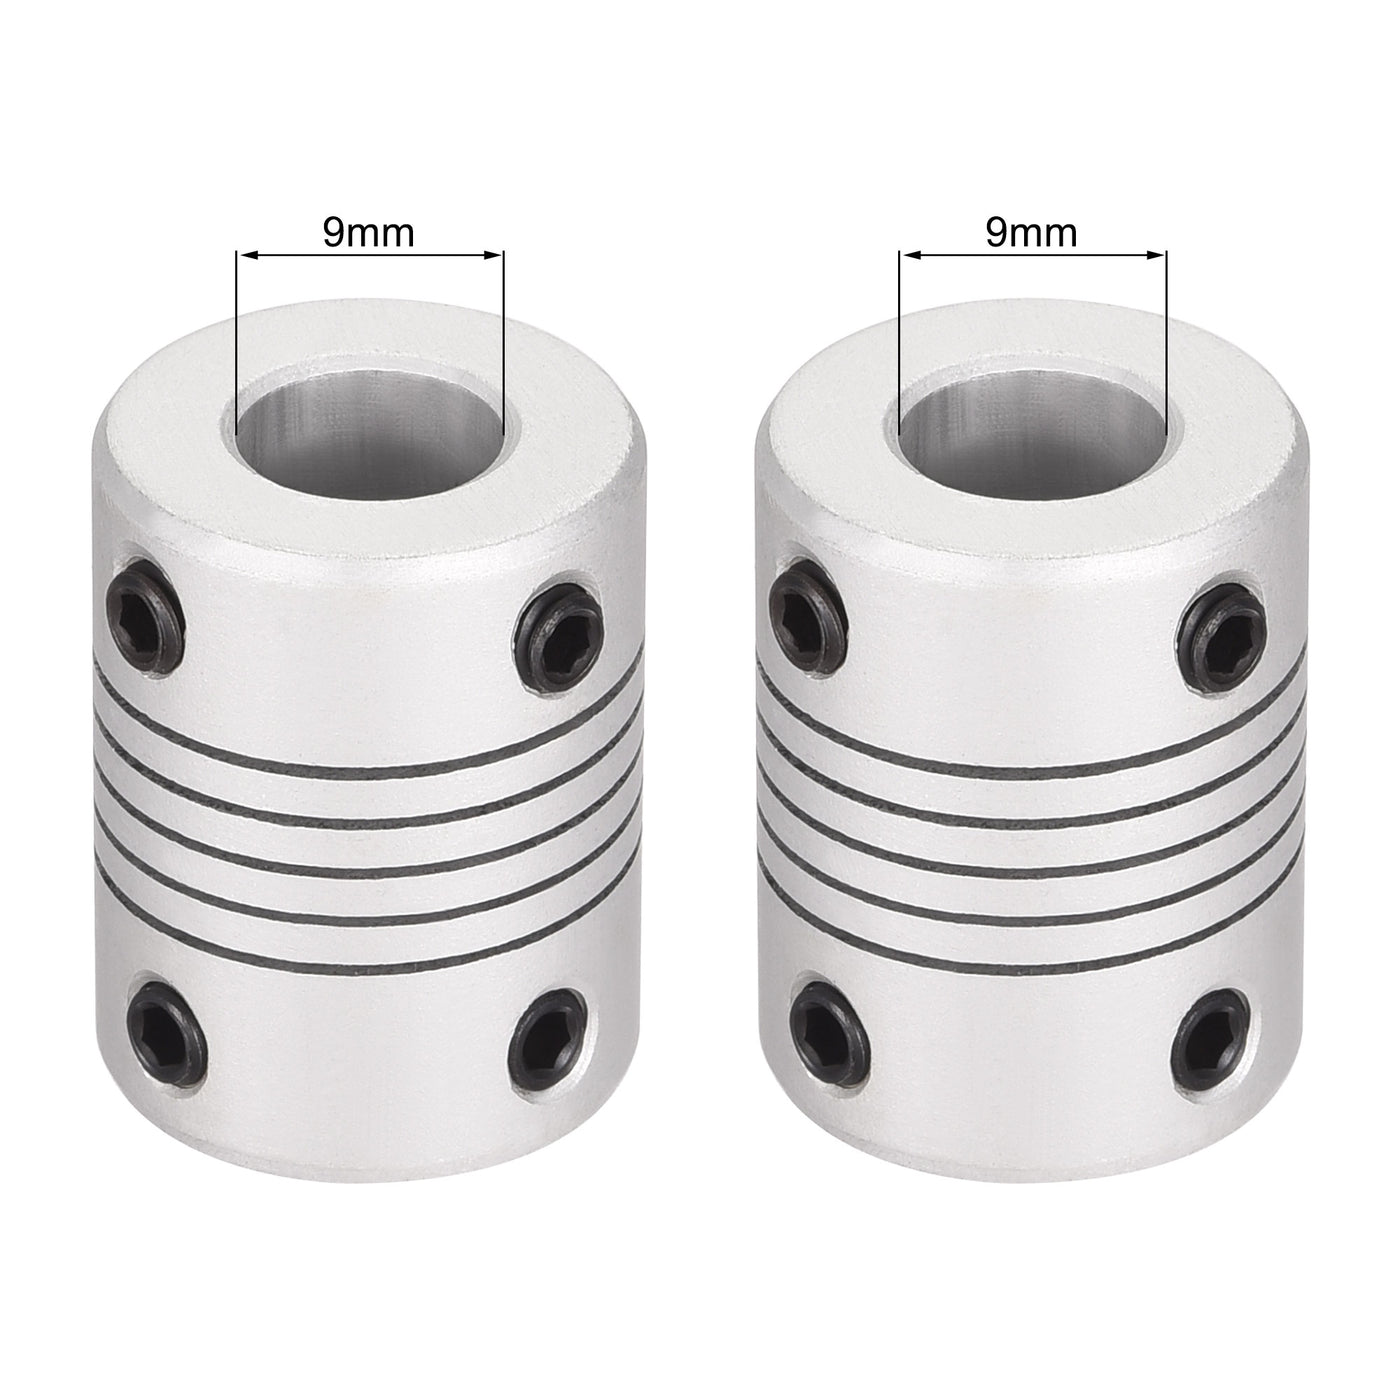 uxcell Uxcell 9mm to 9mm Aluminum Alloy Shaft Coupling Flexible Coupler L25xD19 Silver,5pcs